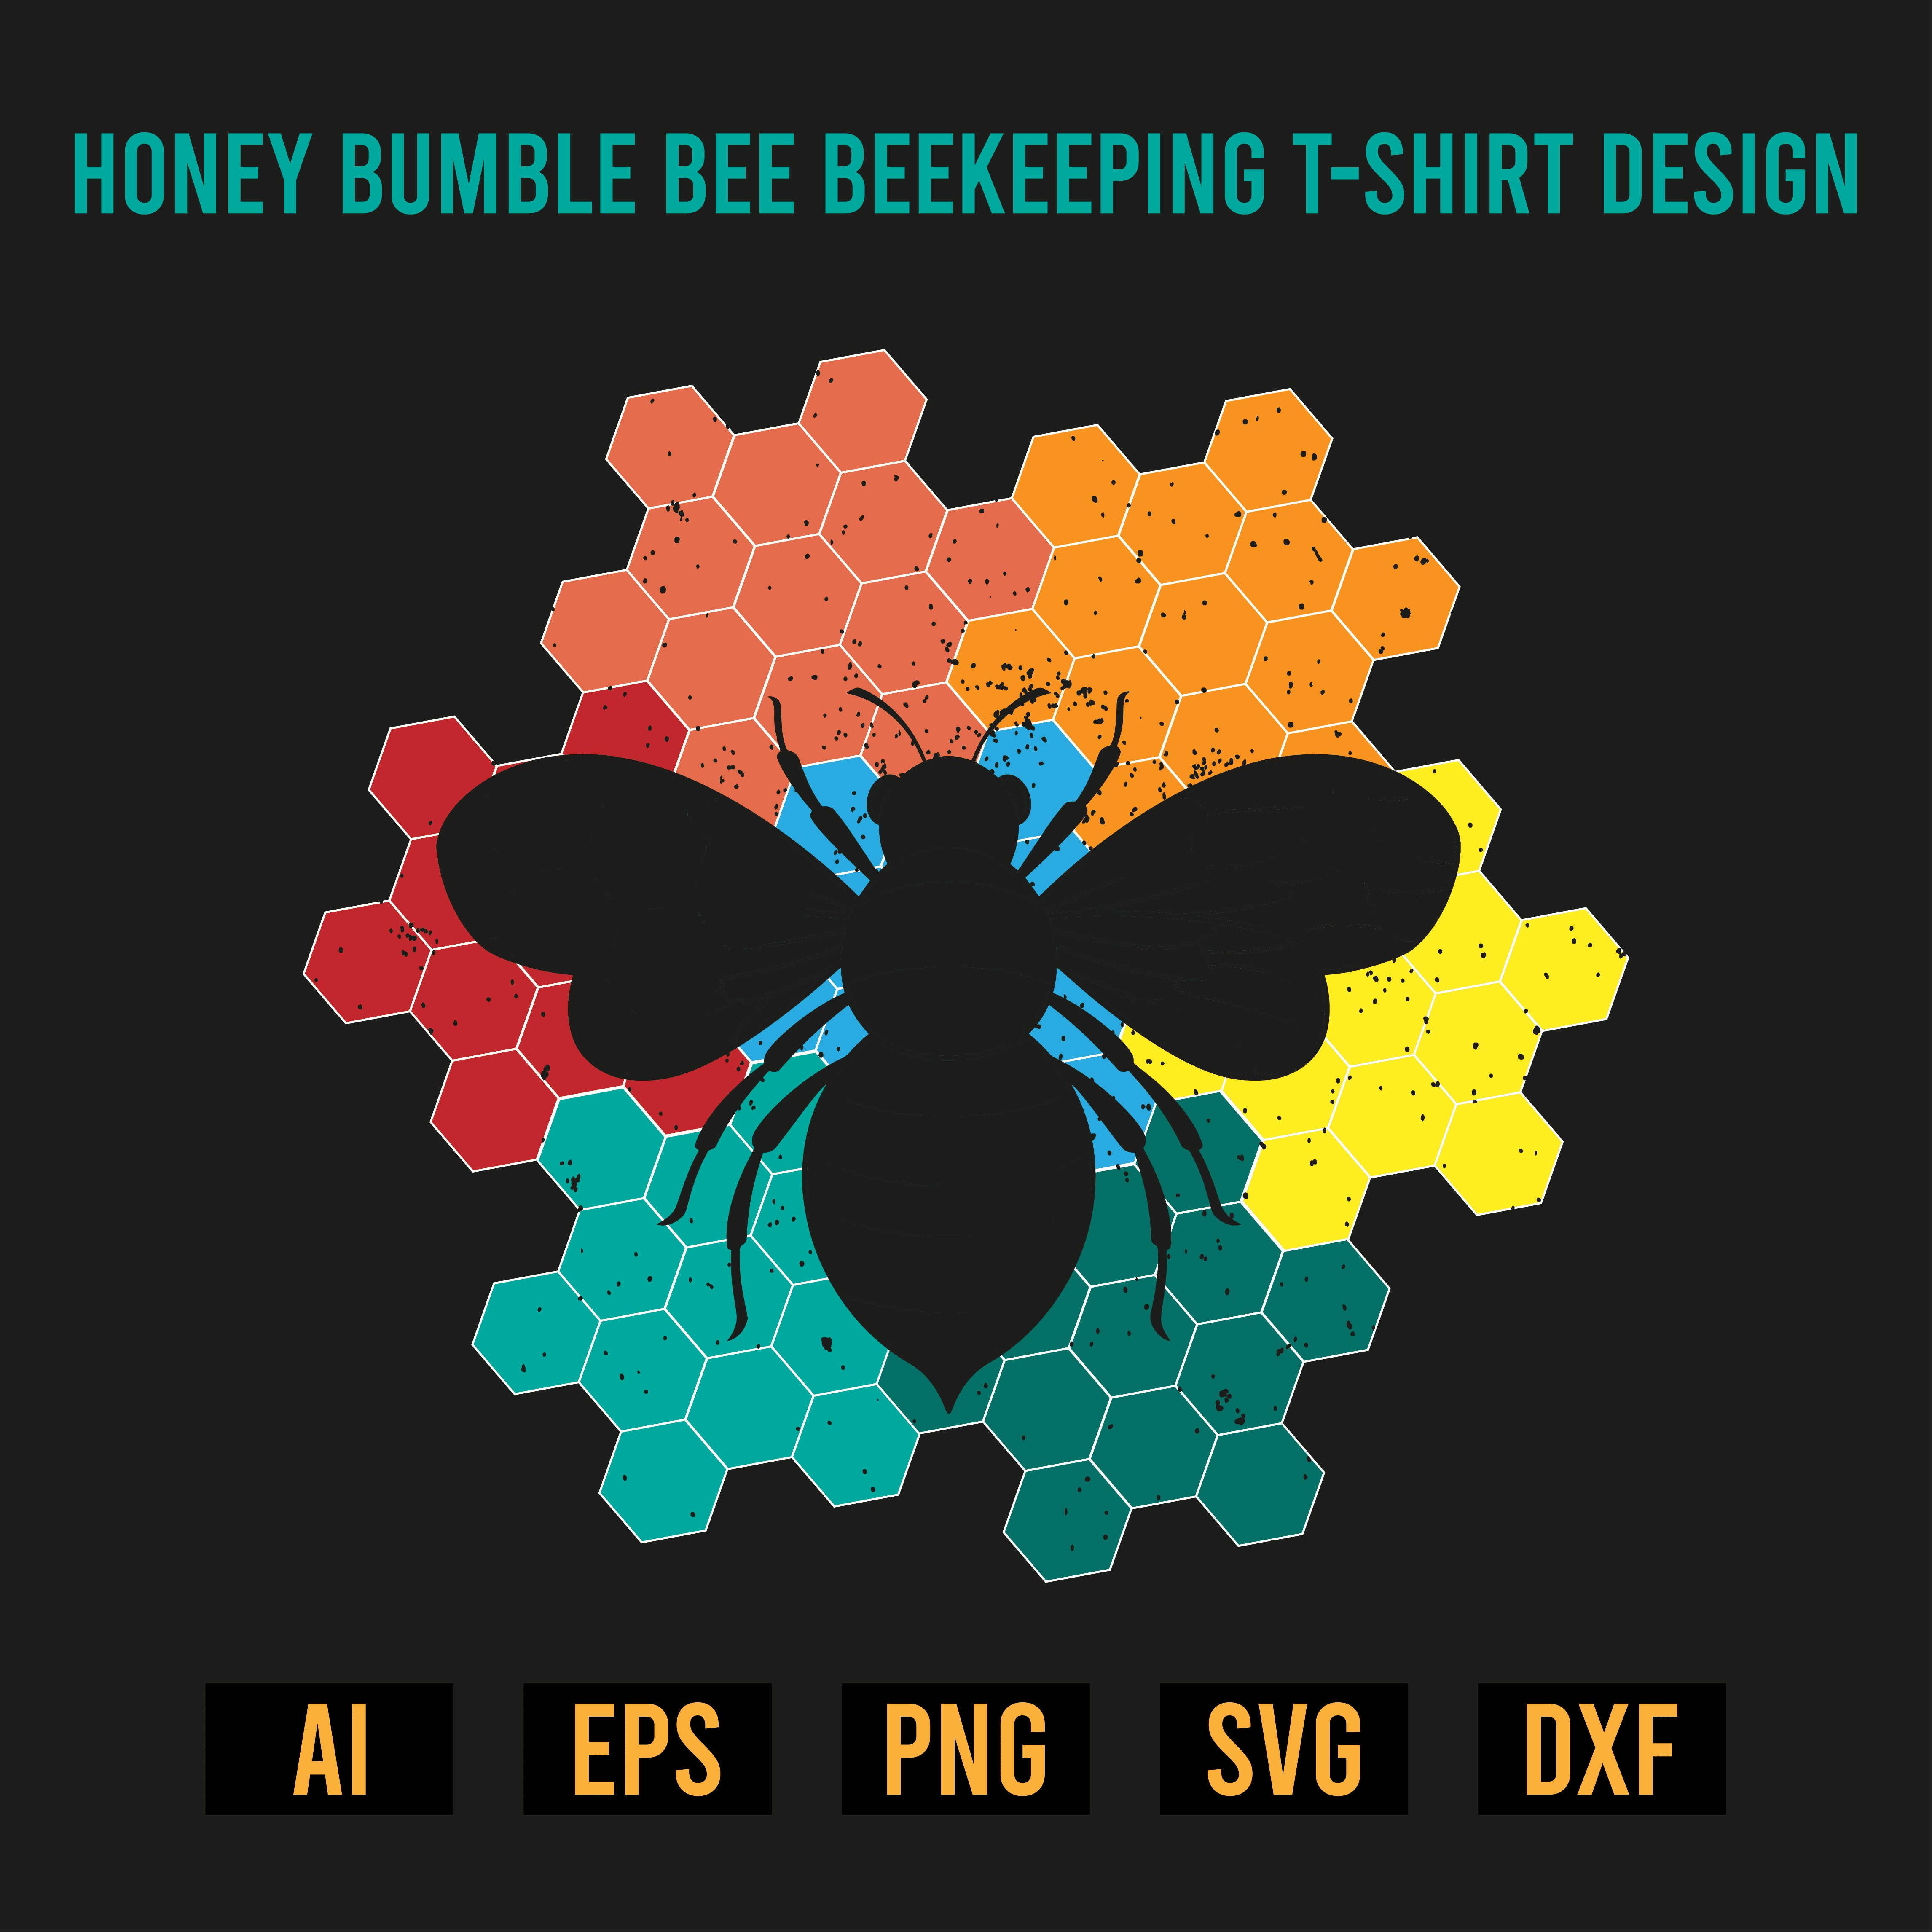 Honey Bumble Bee Beekeeping T- Shirt Design cover image.